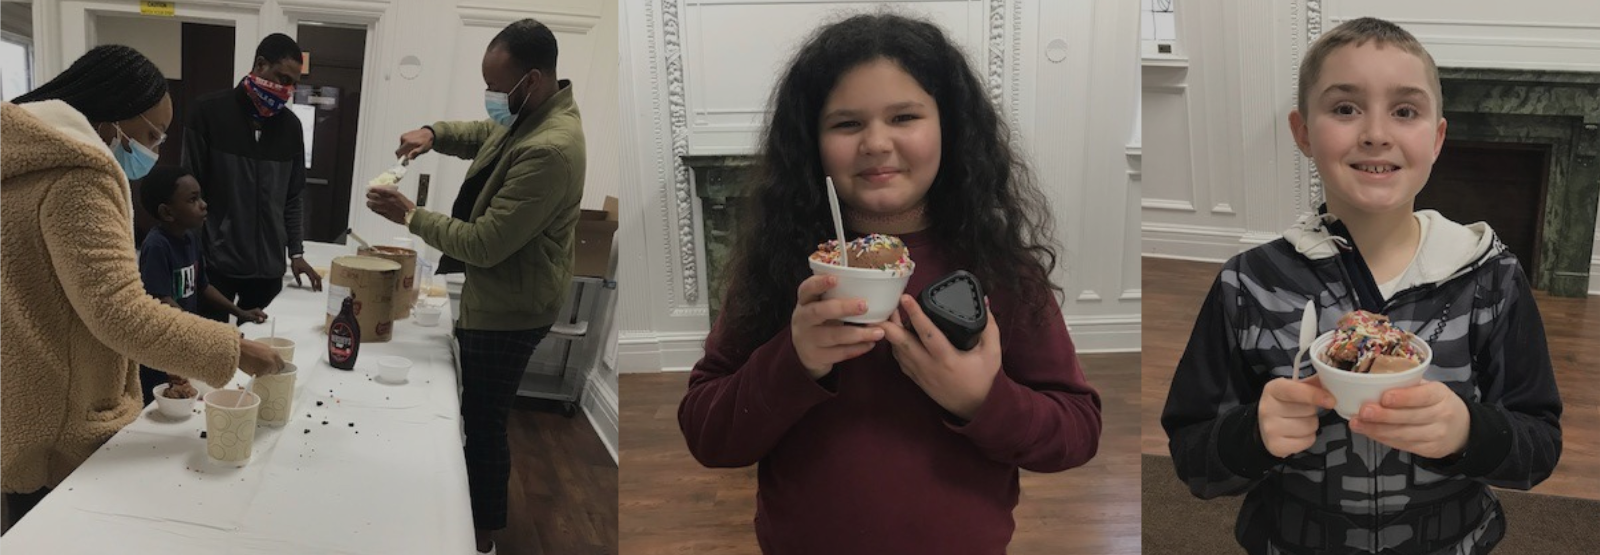 Adults dish out ice cream as children hold bowls smiling